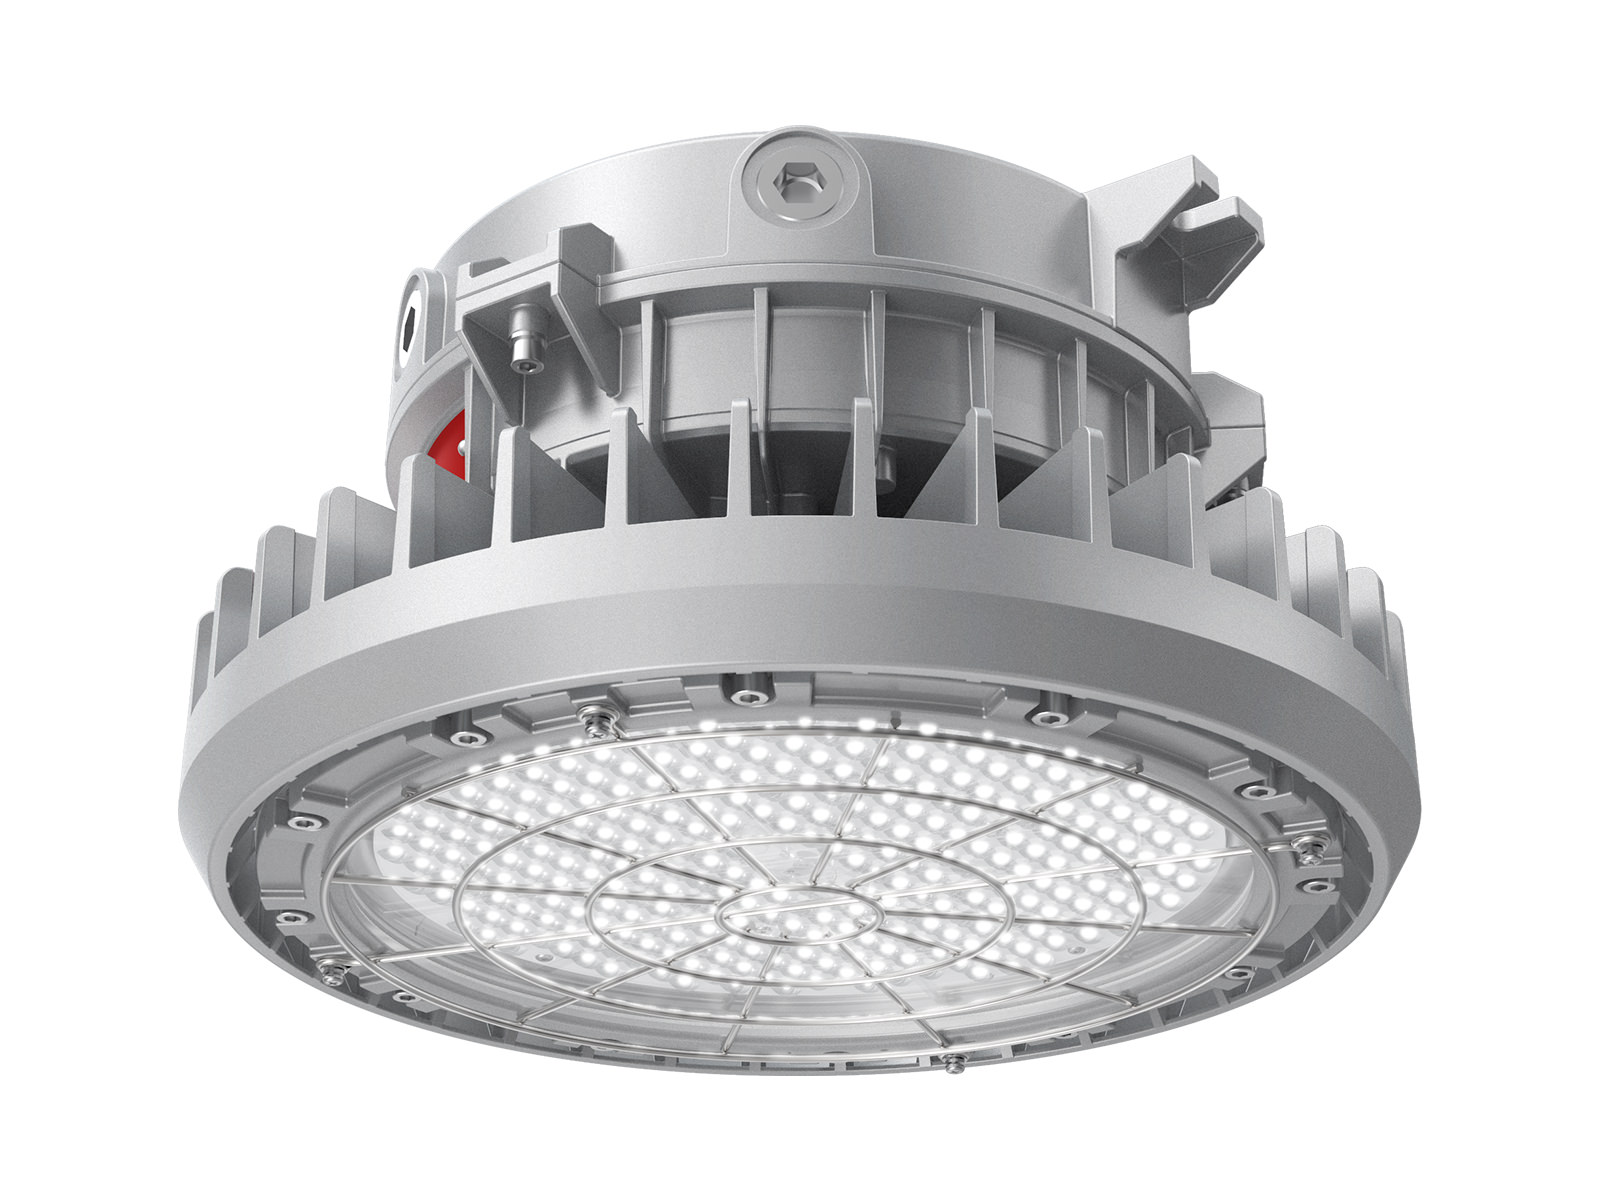 Ha05 4 050 To 32 400lm Led Explosion Proof Light For Harsh And